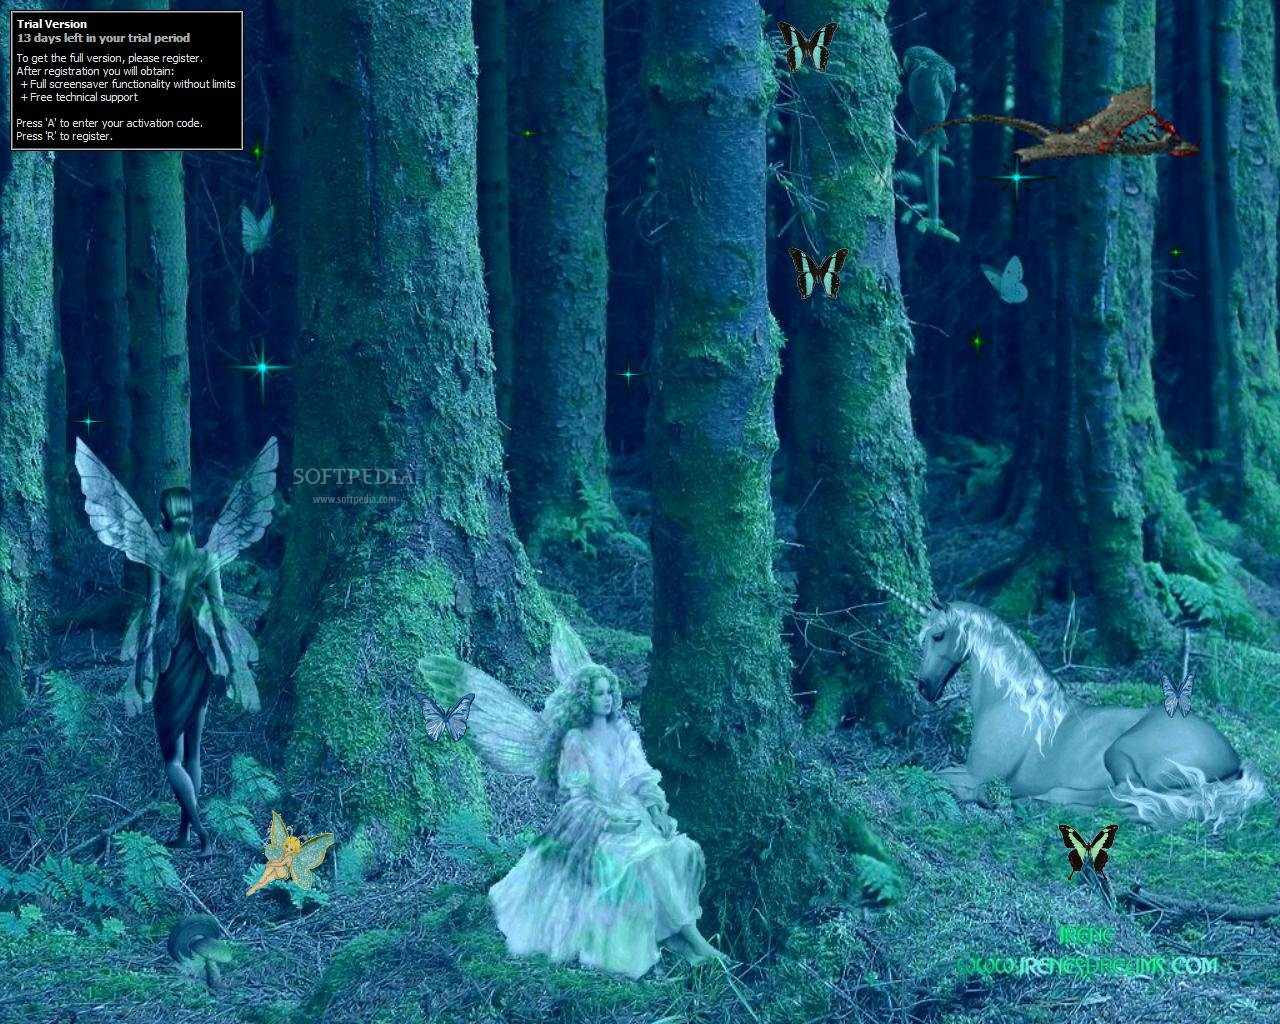 Very popular images New Fairy Site